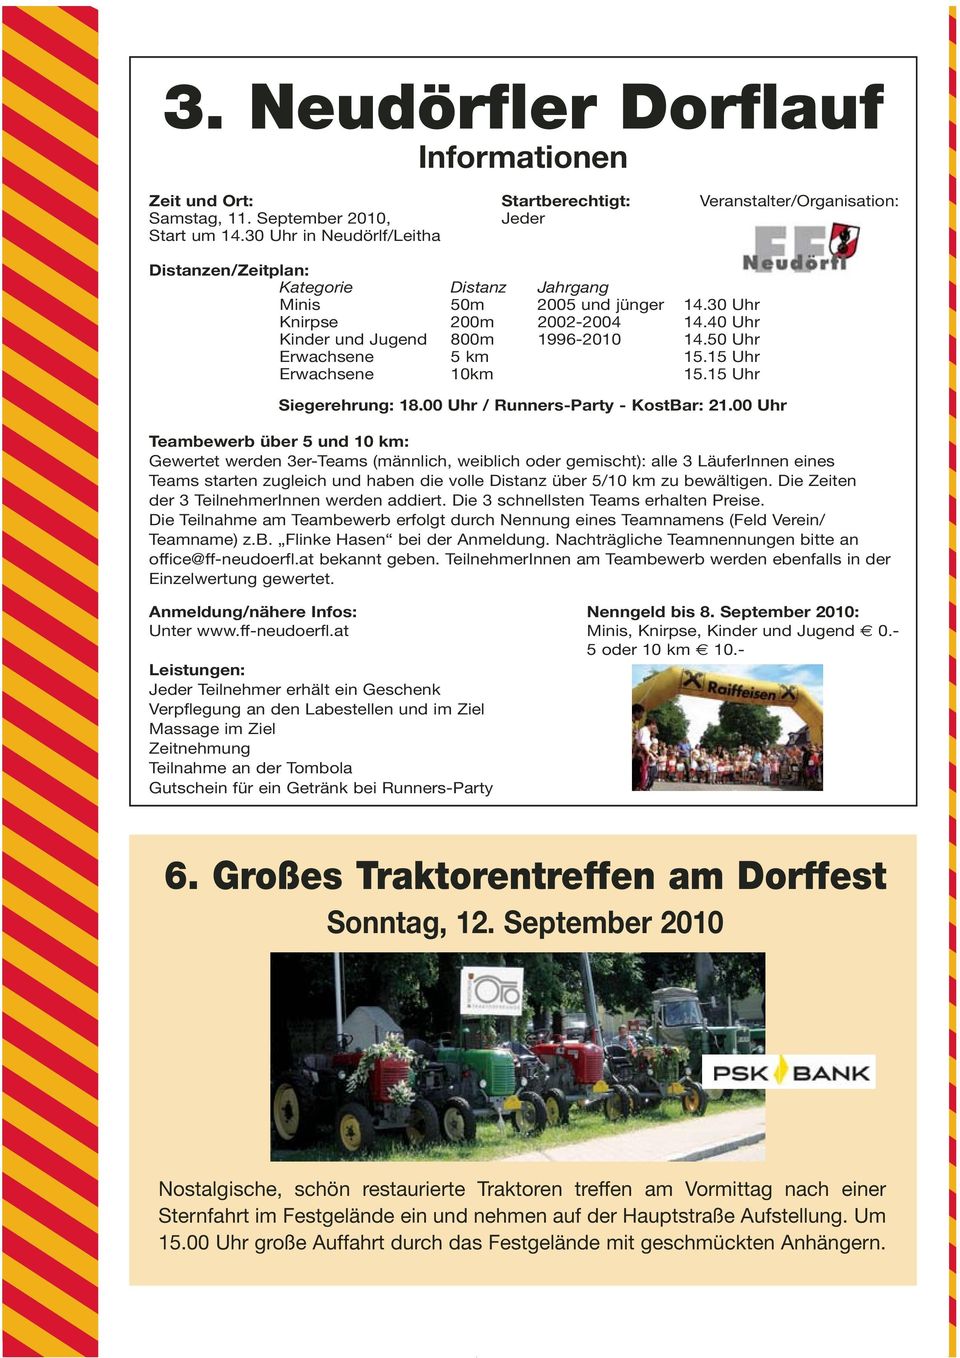 50 Uhr Erwachsene 5 km 15.15 Uhr Erwachsene 10km 15.15 Uhr Siegerehrung: 18.00 Uhr / Runners-Party - KostBar: 21.